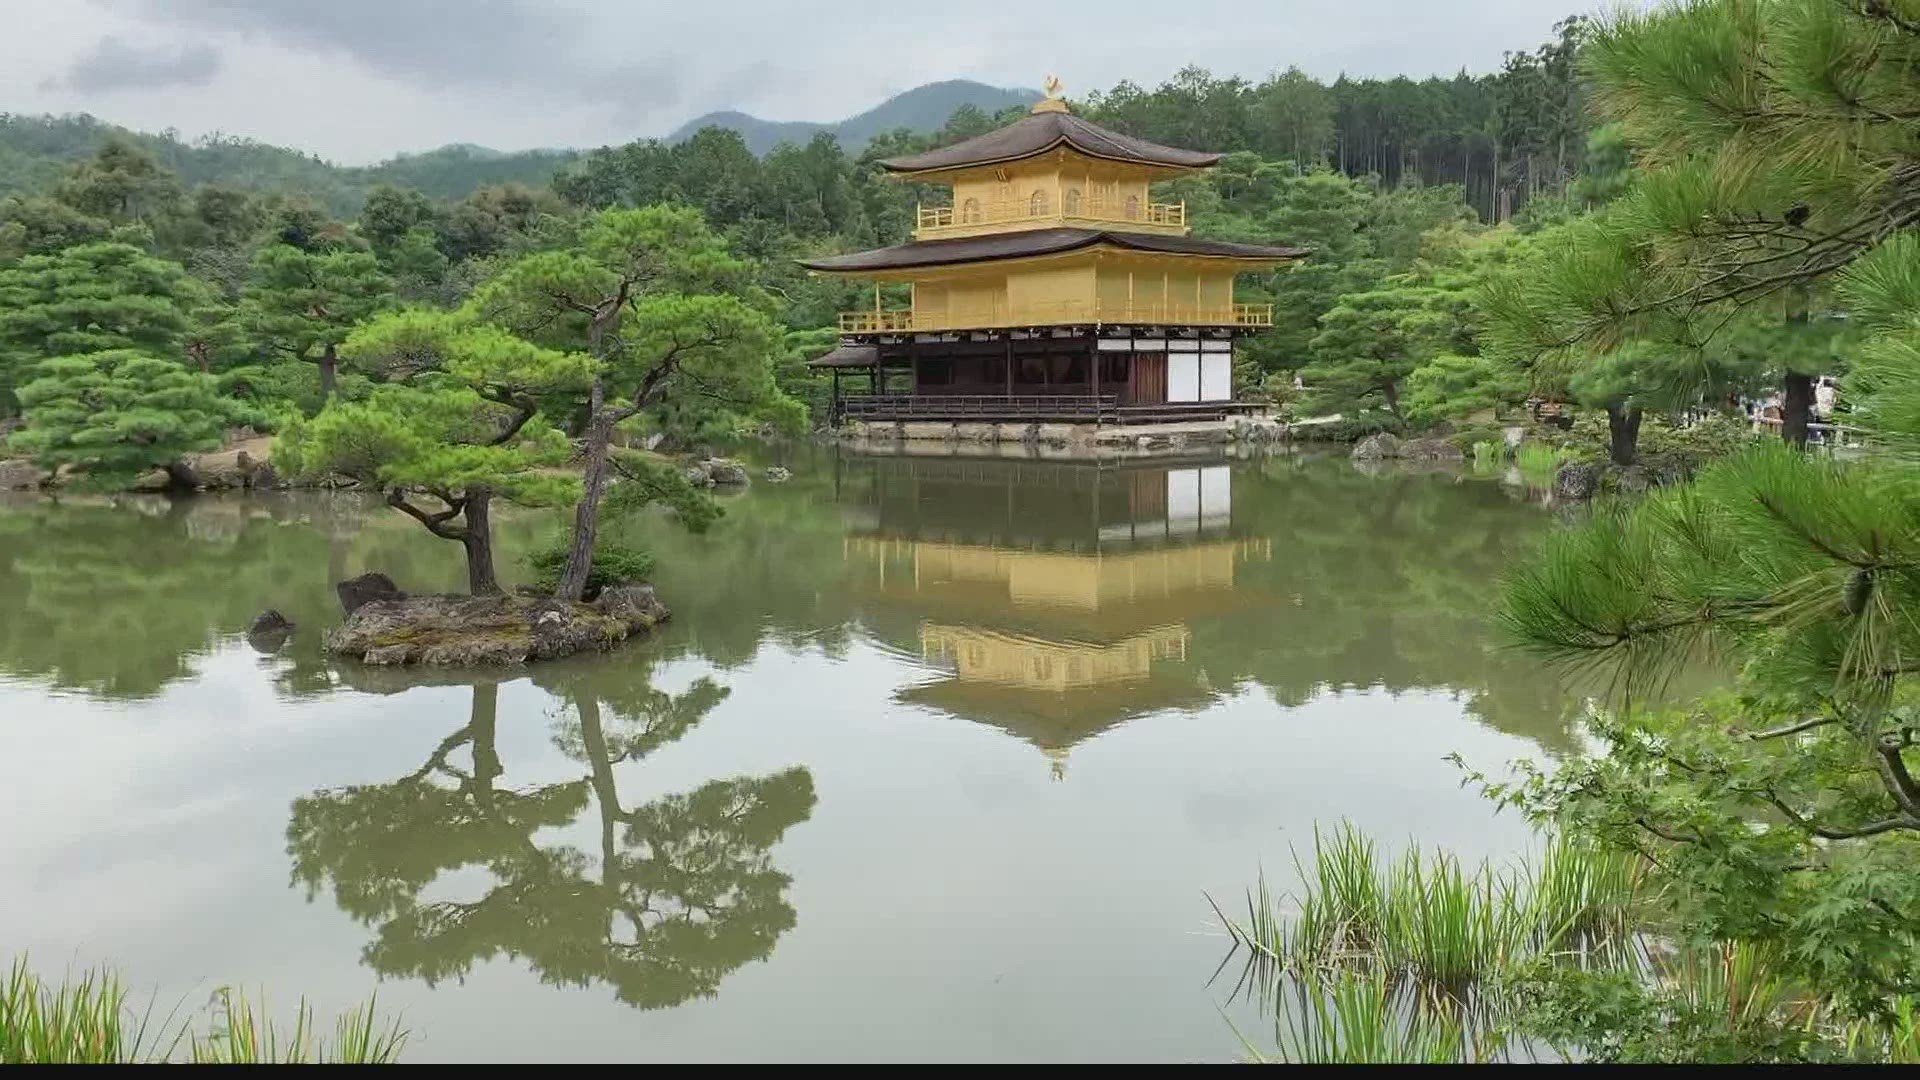 The second and third stories of the Golden Pavilion are adorned with pure gold leaf.